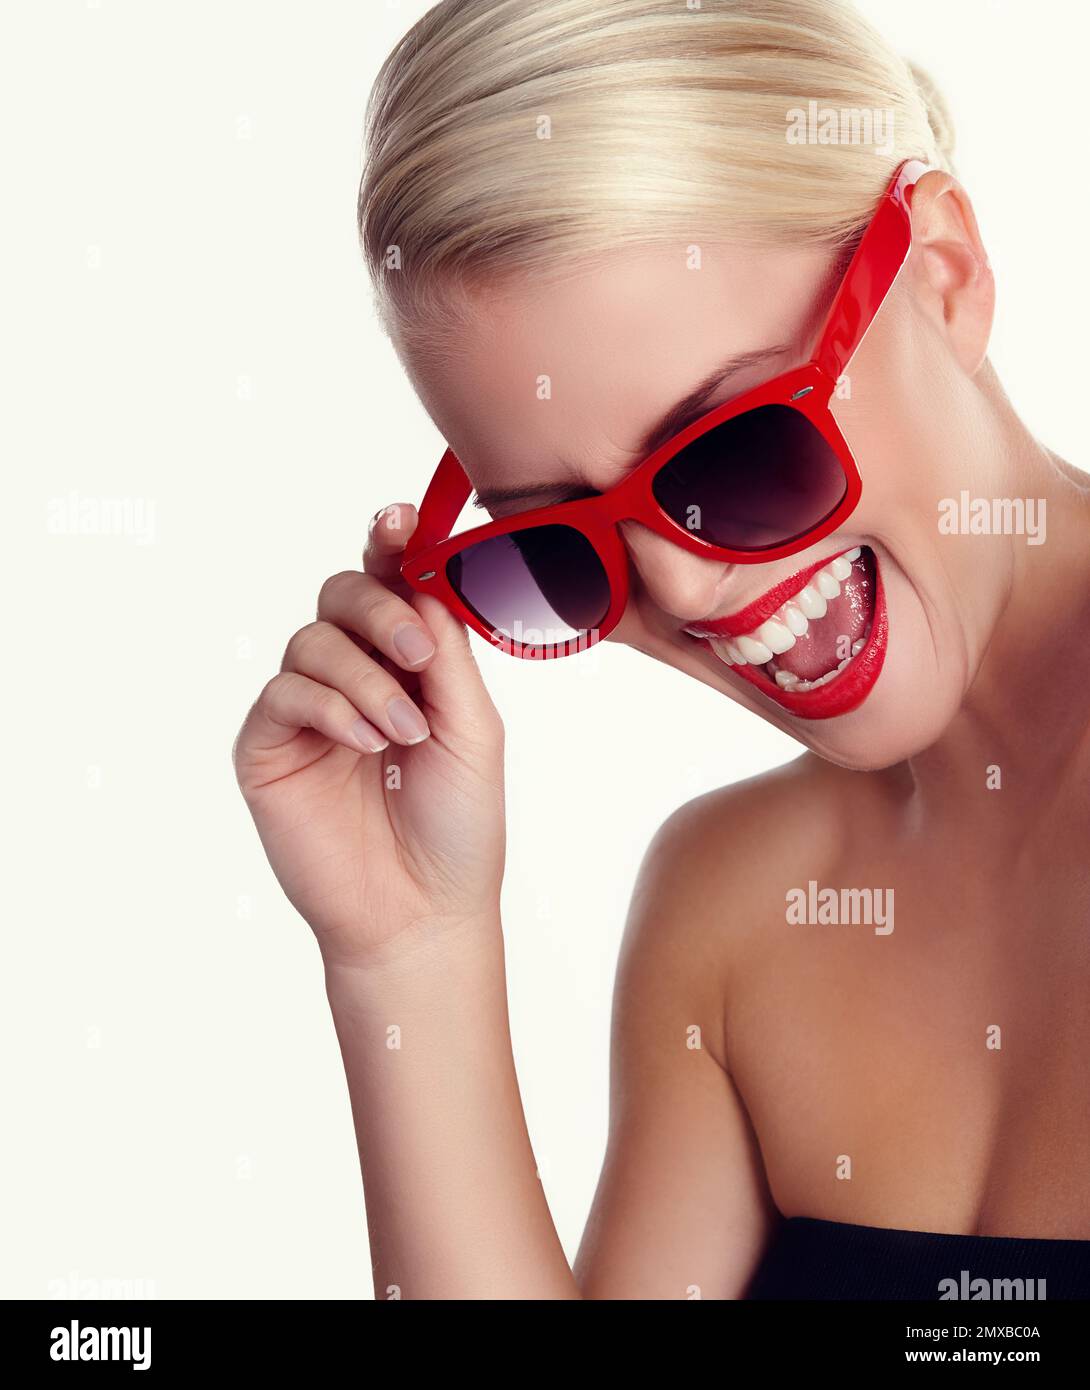 Blonde bombshell. A smiling blonde wearing red sunglasses against an isolated background. Stock Photo